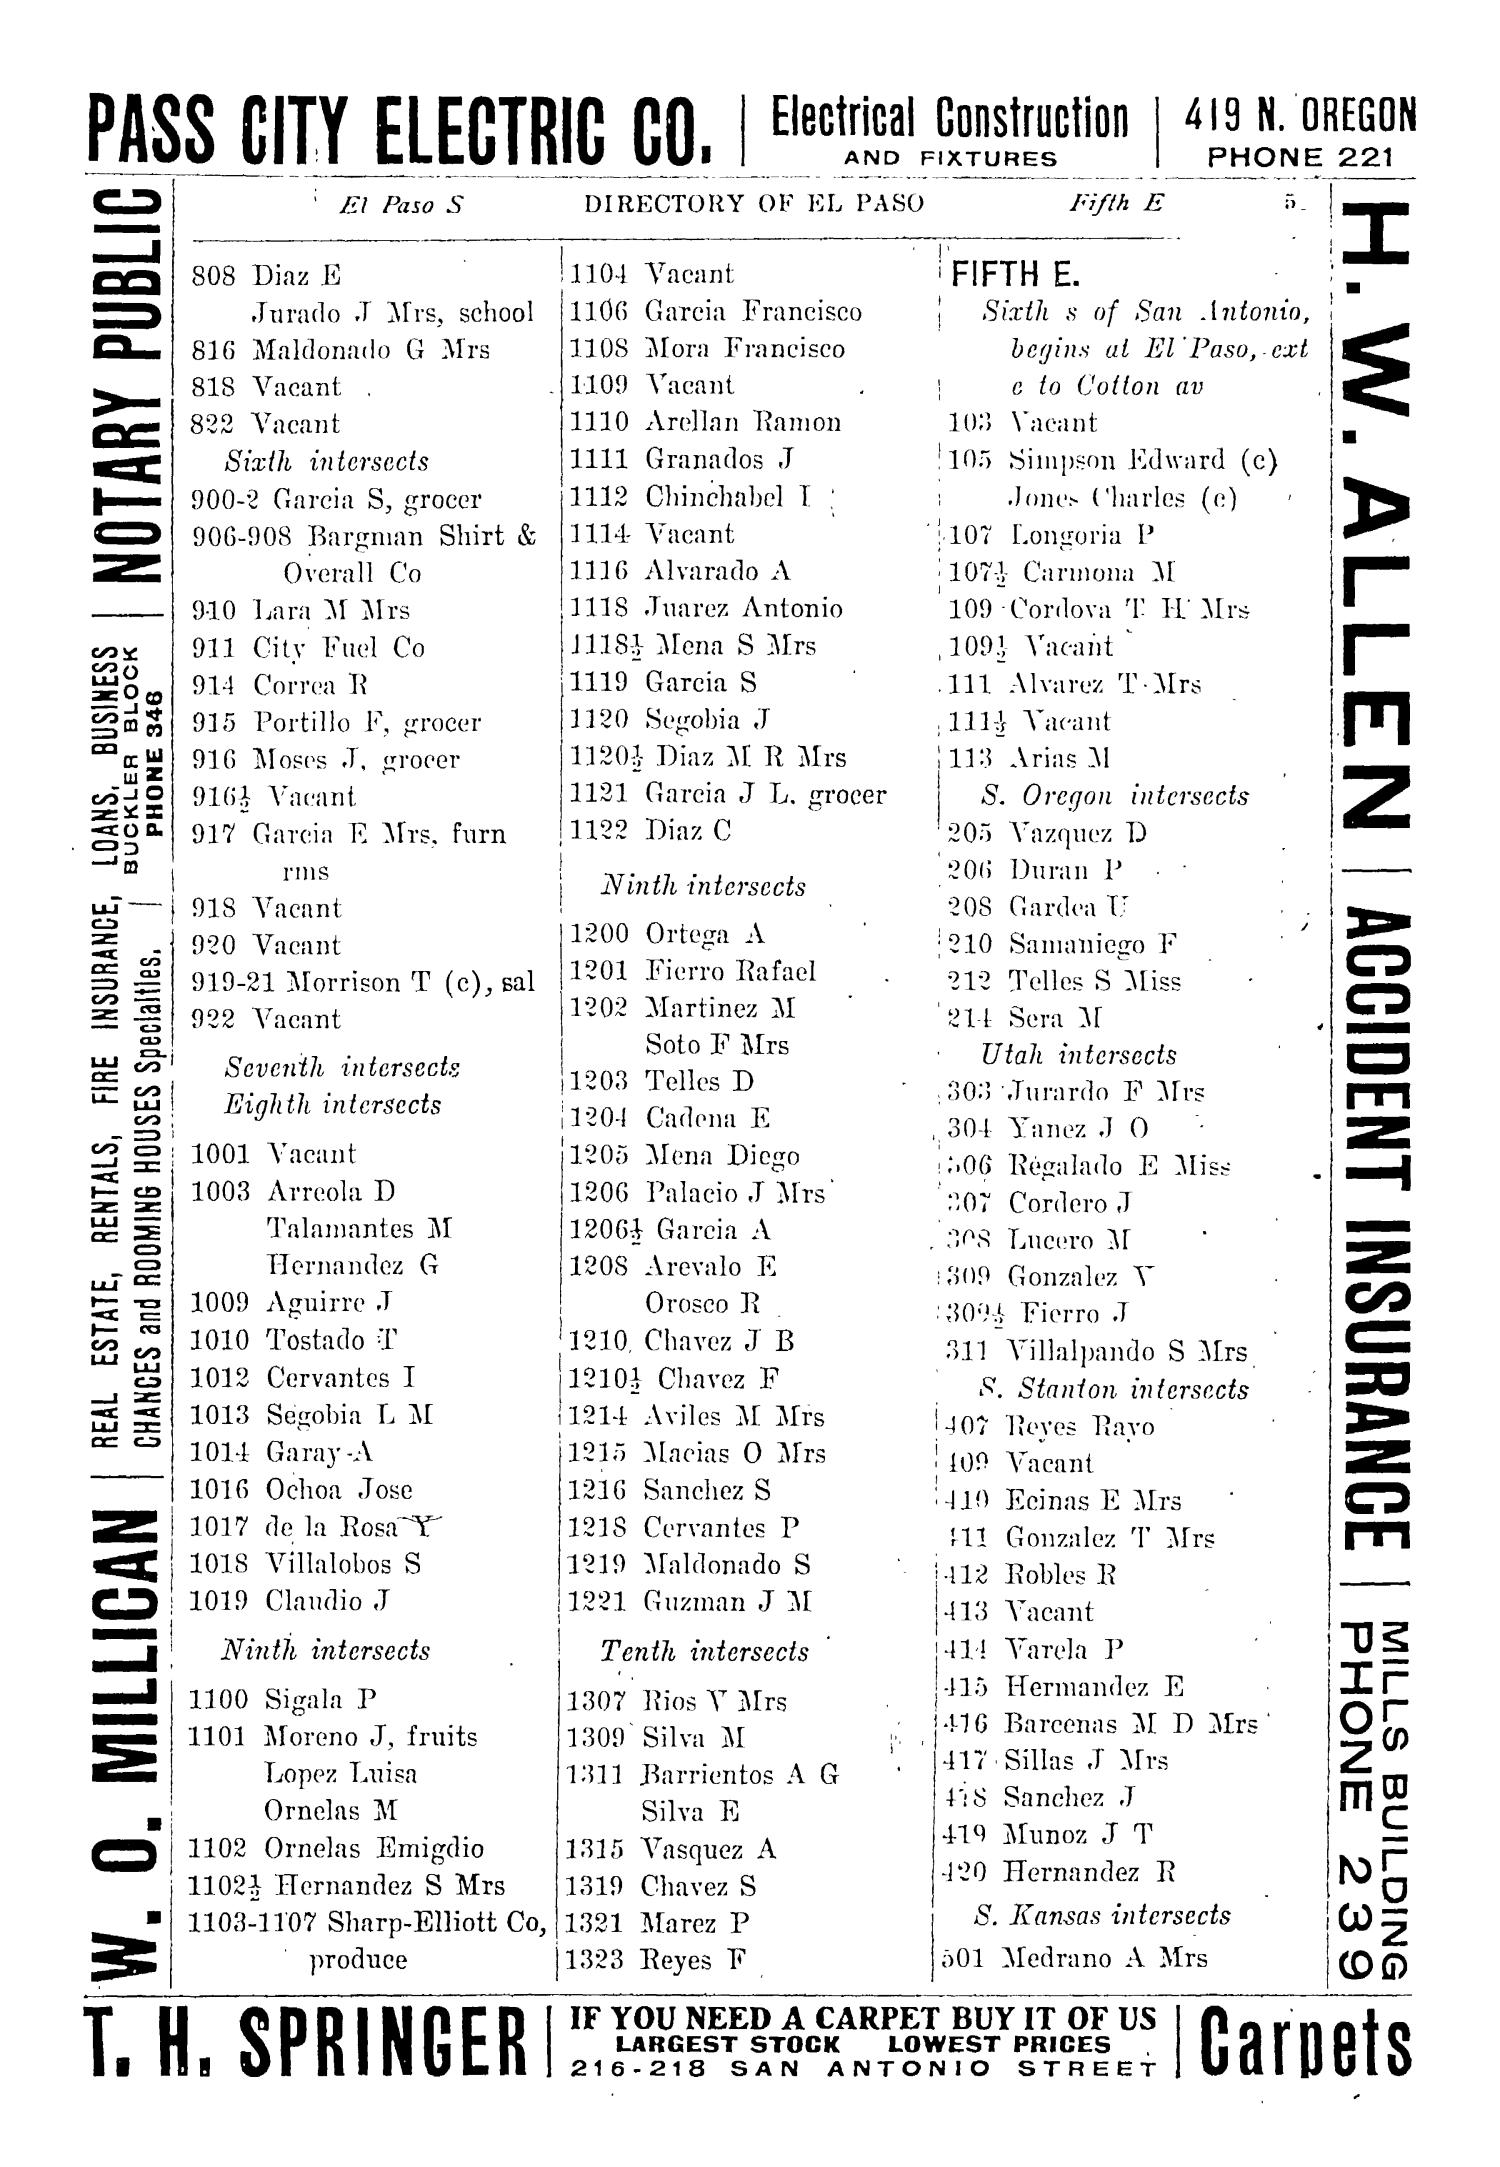 John F. Worley & Co.'s El Paso Directory for 1905
                                                
                                                    51
                                                